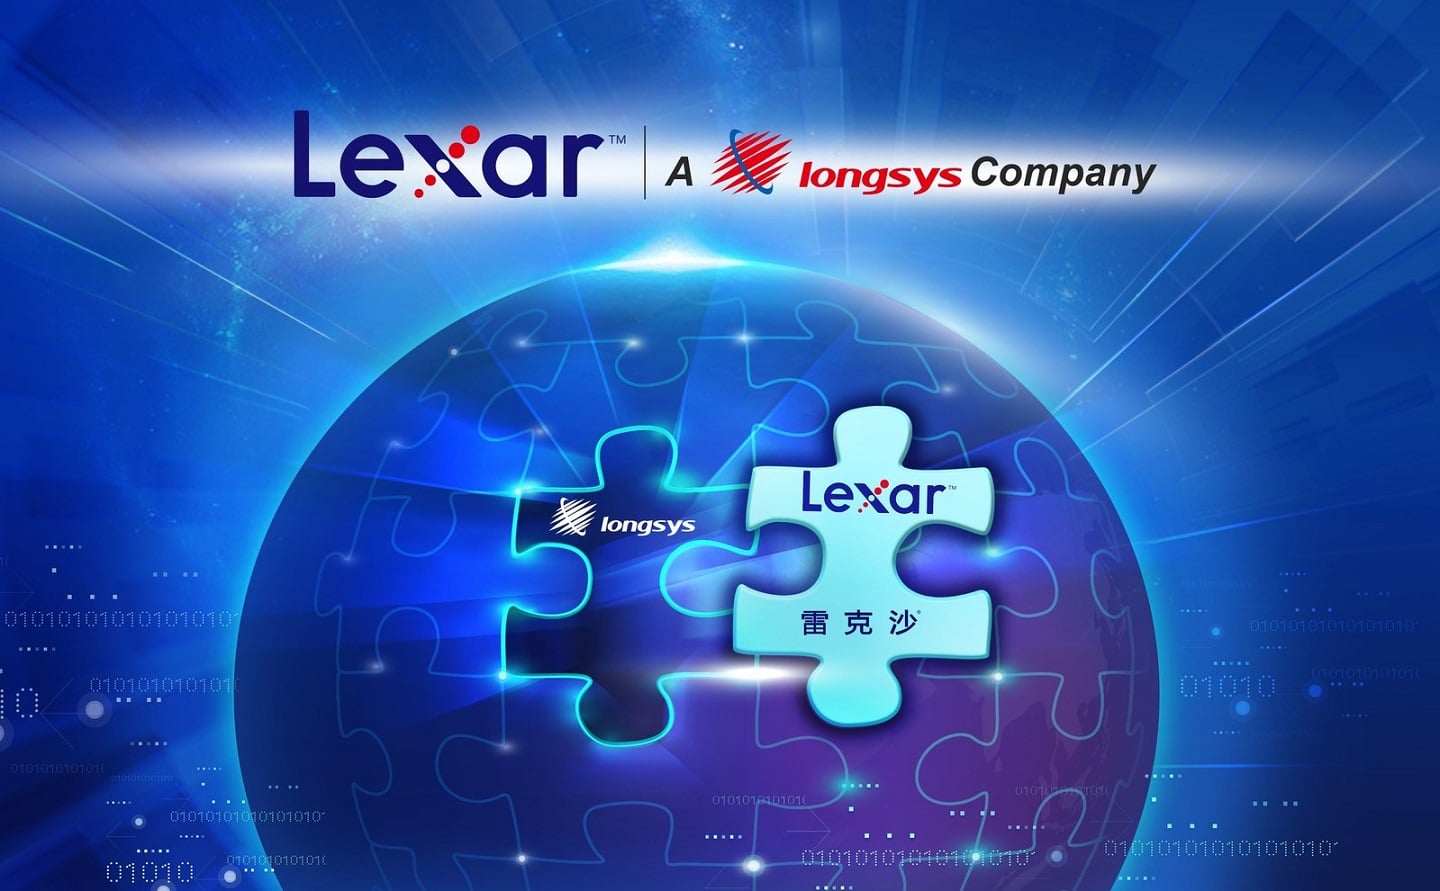 Longsys Acquires Lexar Brand from Micron